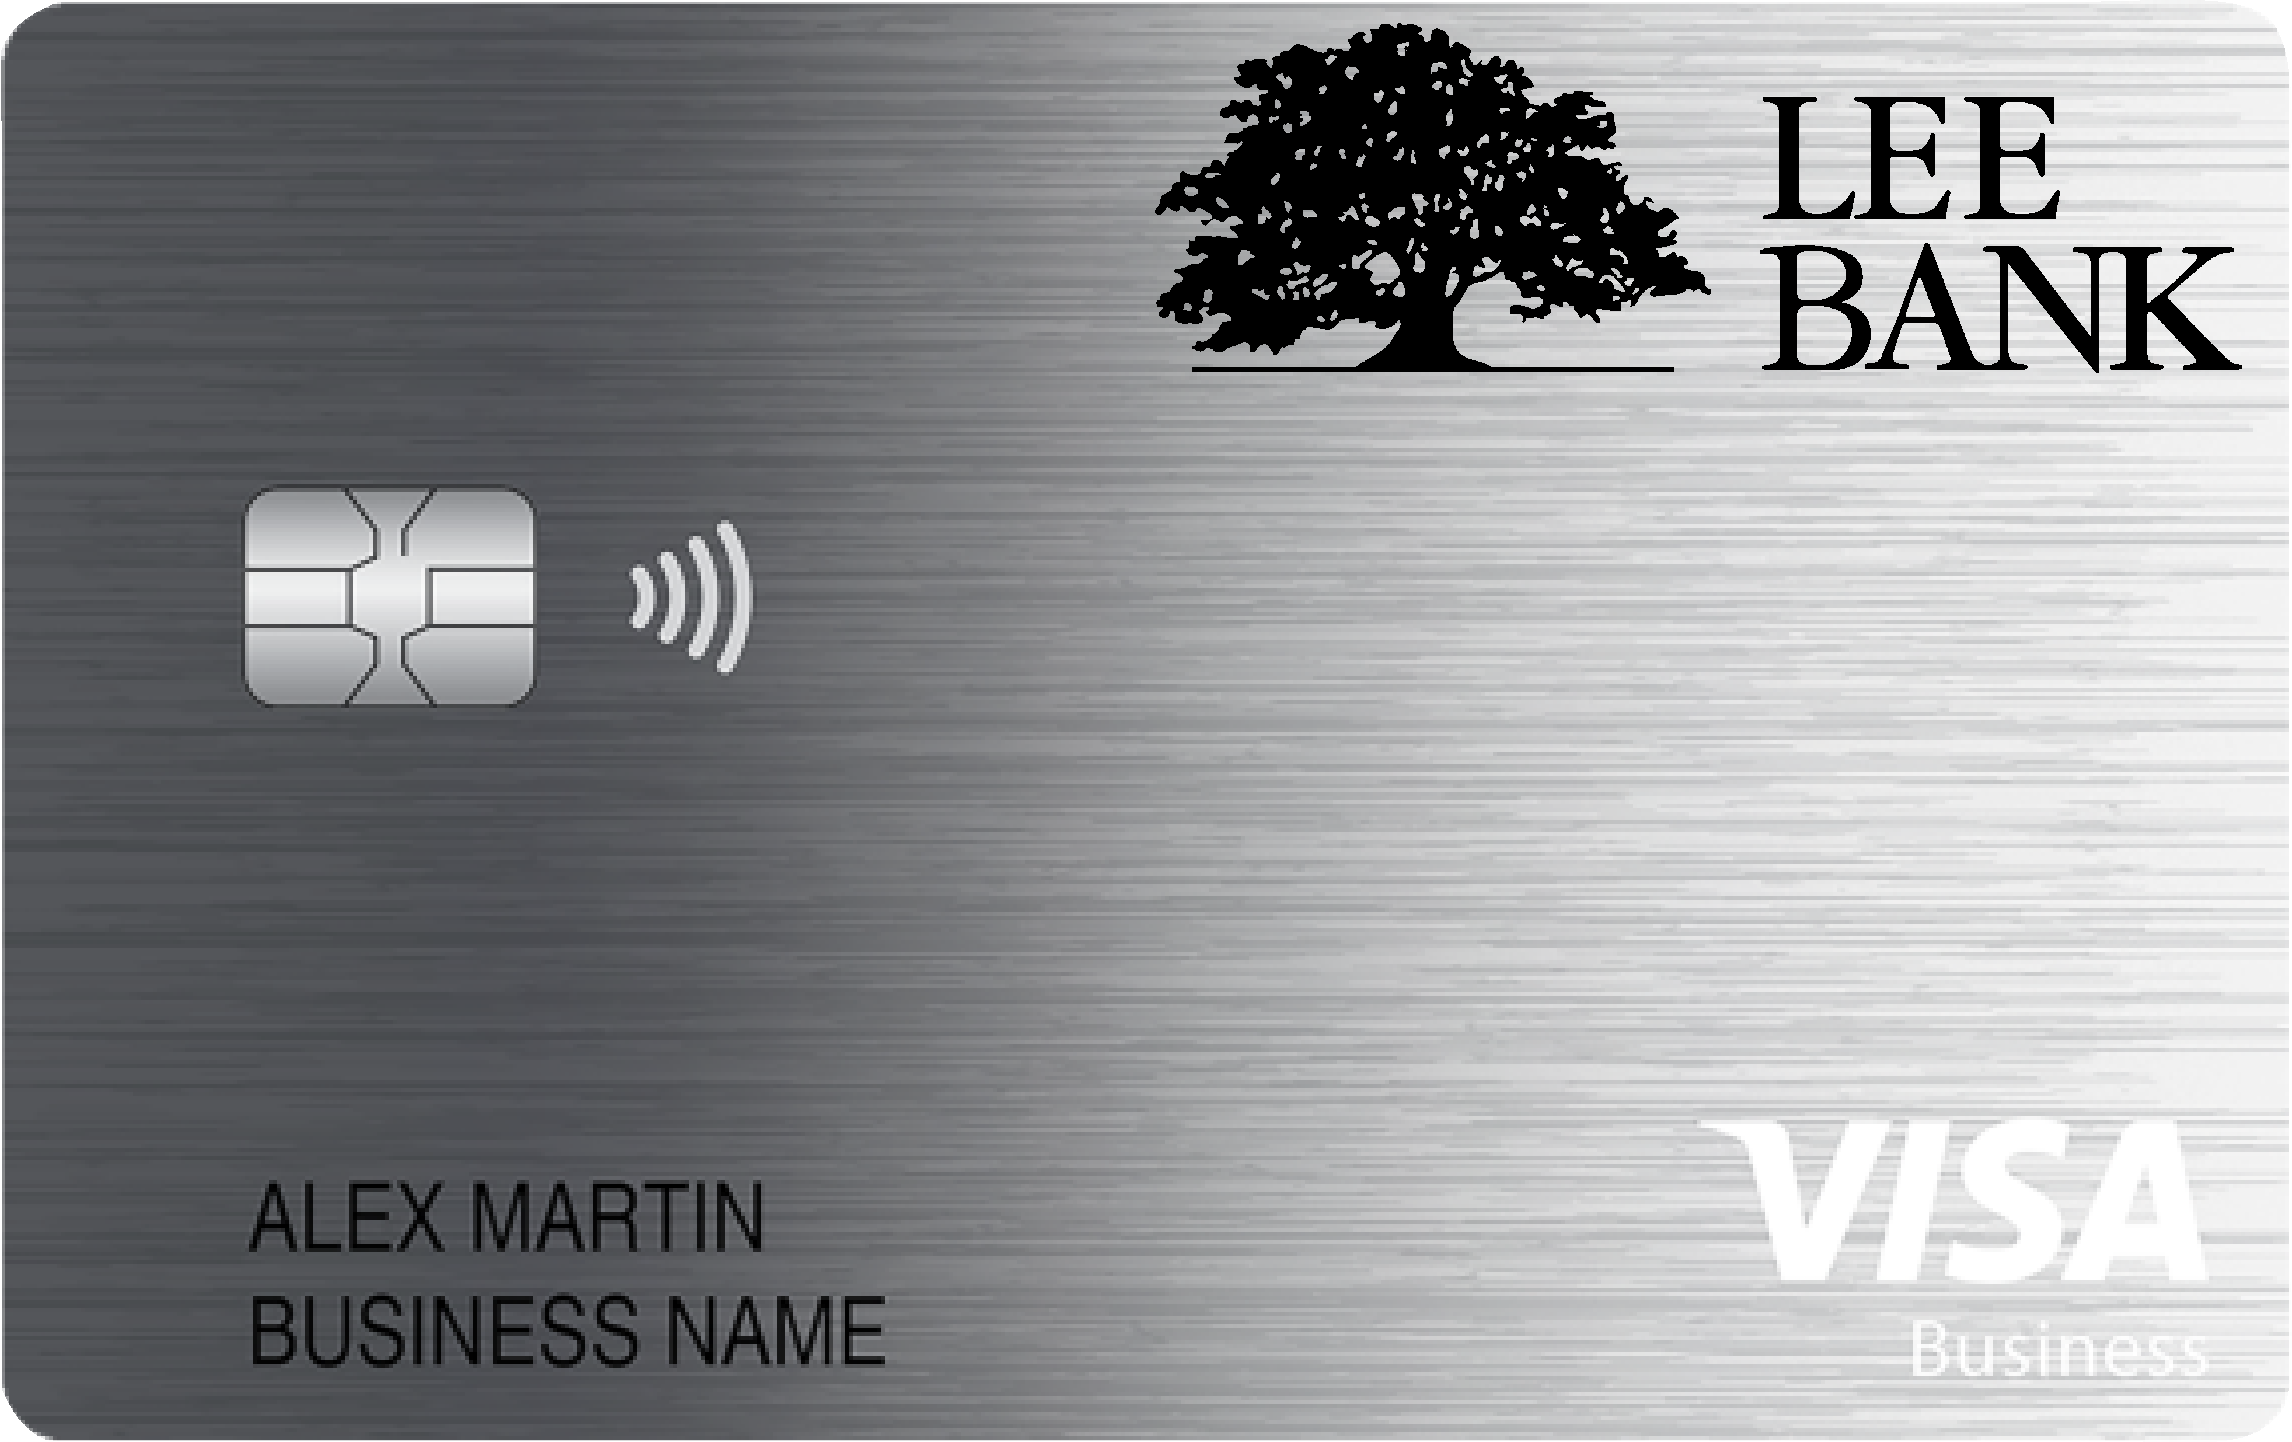 Lee Bank Business Card Card